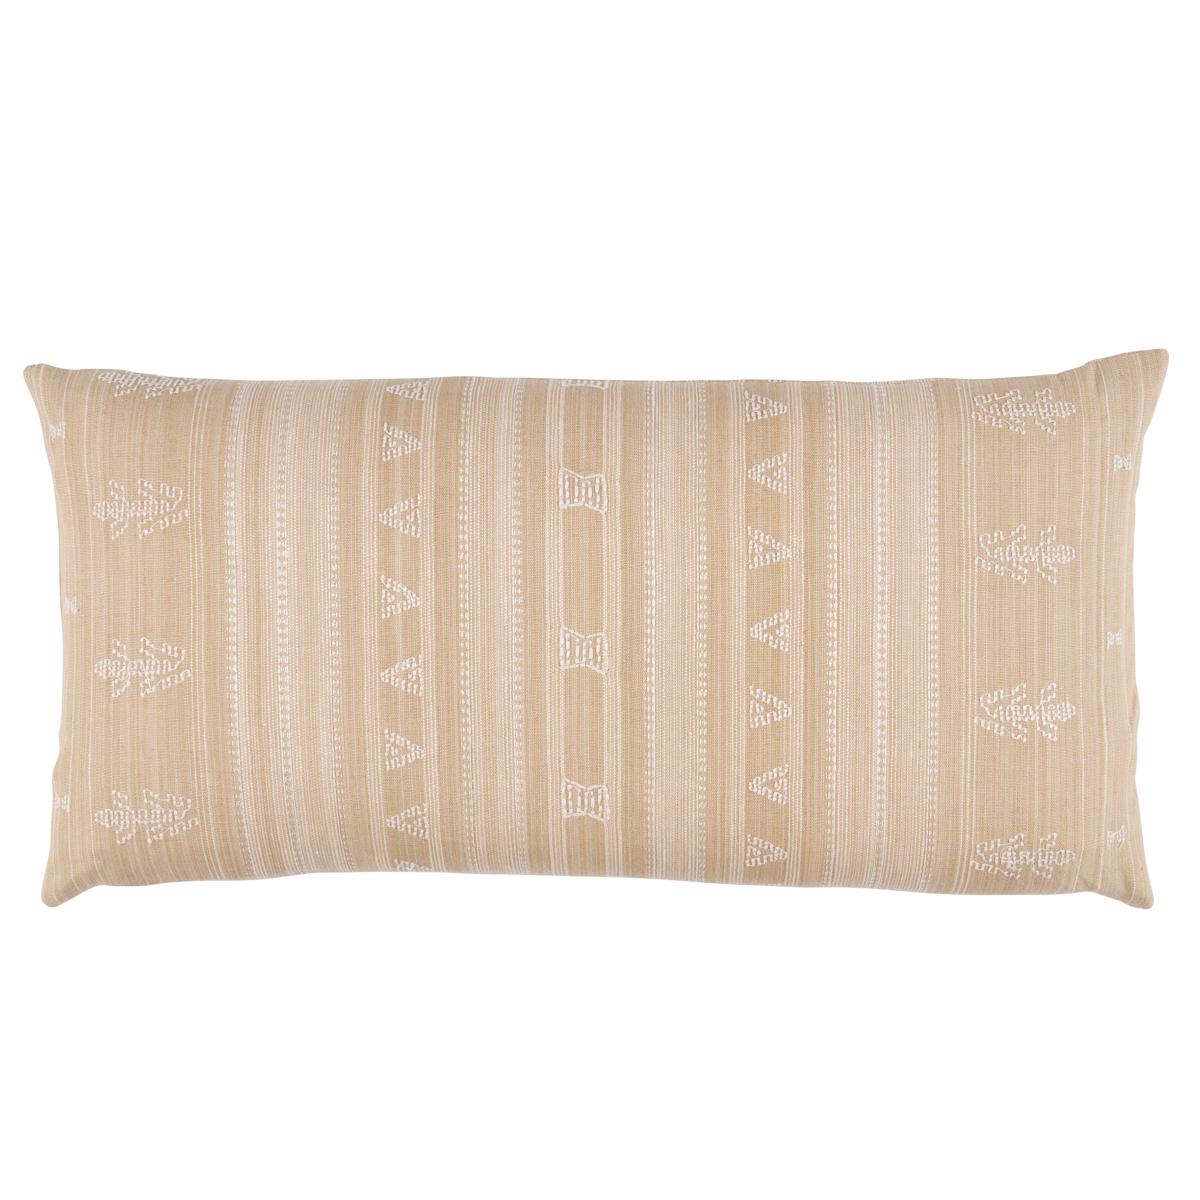 Nima Embroidered Pillow in Tan 24 x 12" For Sale